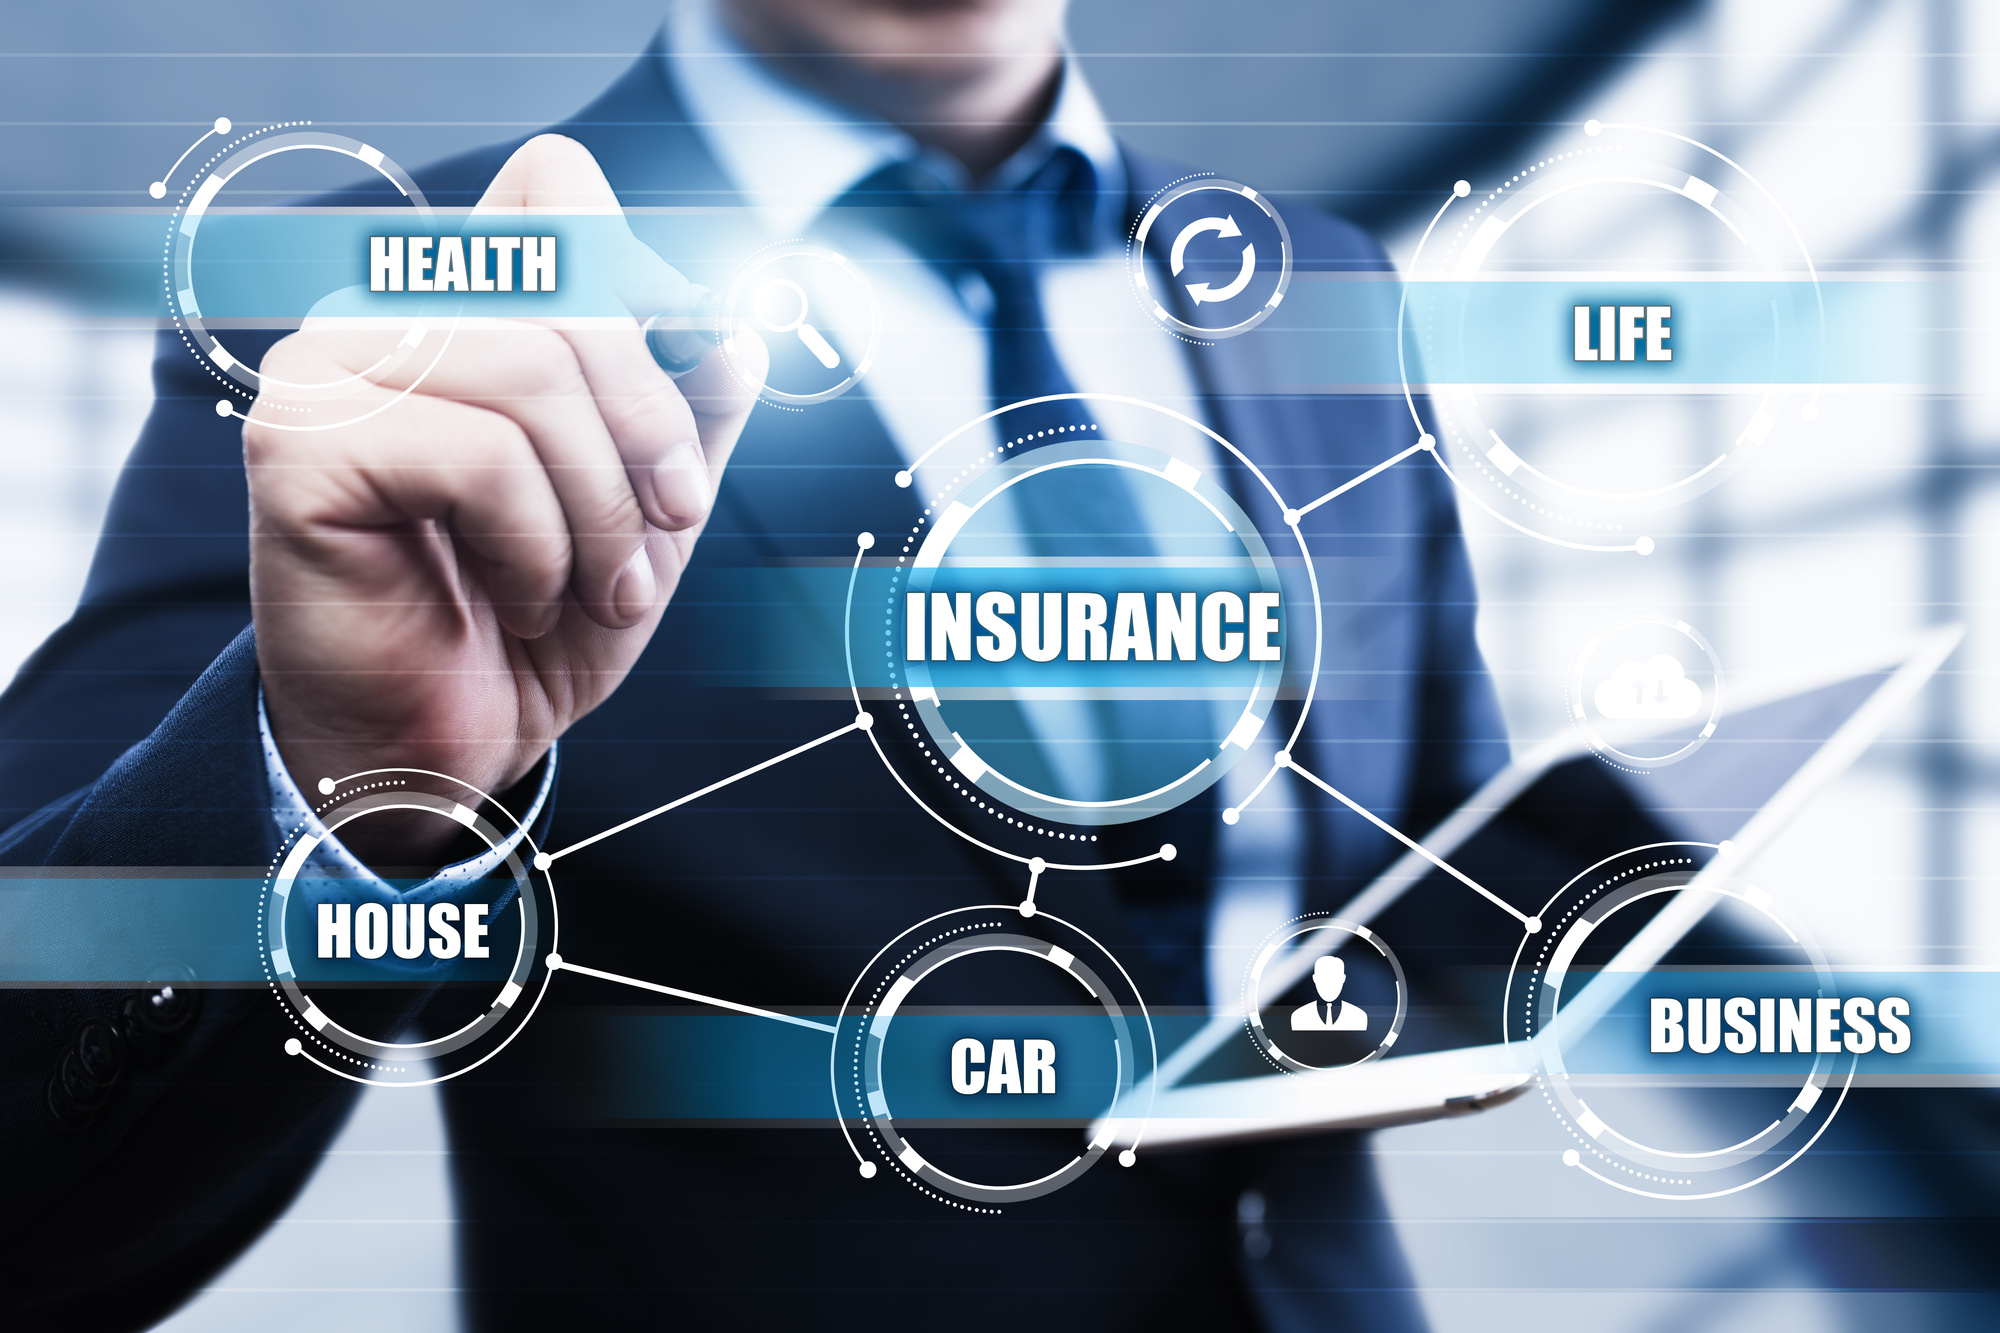 How To Sell Insurance 5 Expert Tips for Generating Leads